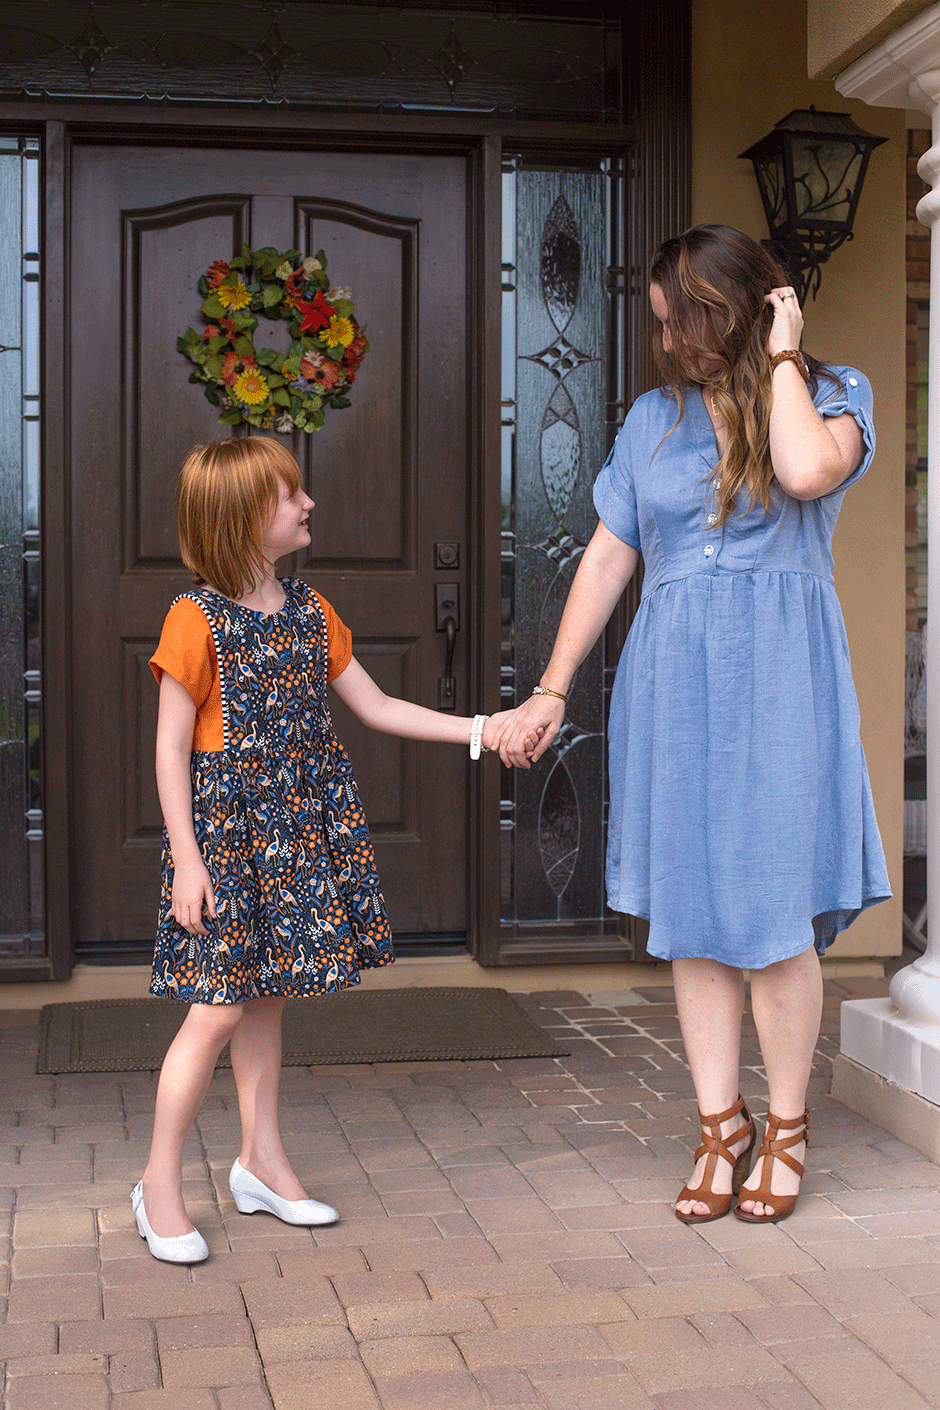 Whipping up a few warm weather dresses is the perfect welcome to a long overdue spring! These two dress patterns (one for girls and one for women) are surefire beginner favorites that will stand the test of time, and both are a breeze to sew. They both use woven fabrics which are easy to work with and widely available in super cute prints. Check out some inspiration below and get yourself started sewing spring dresses!